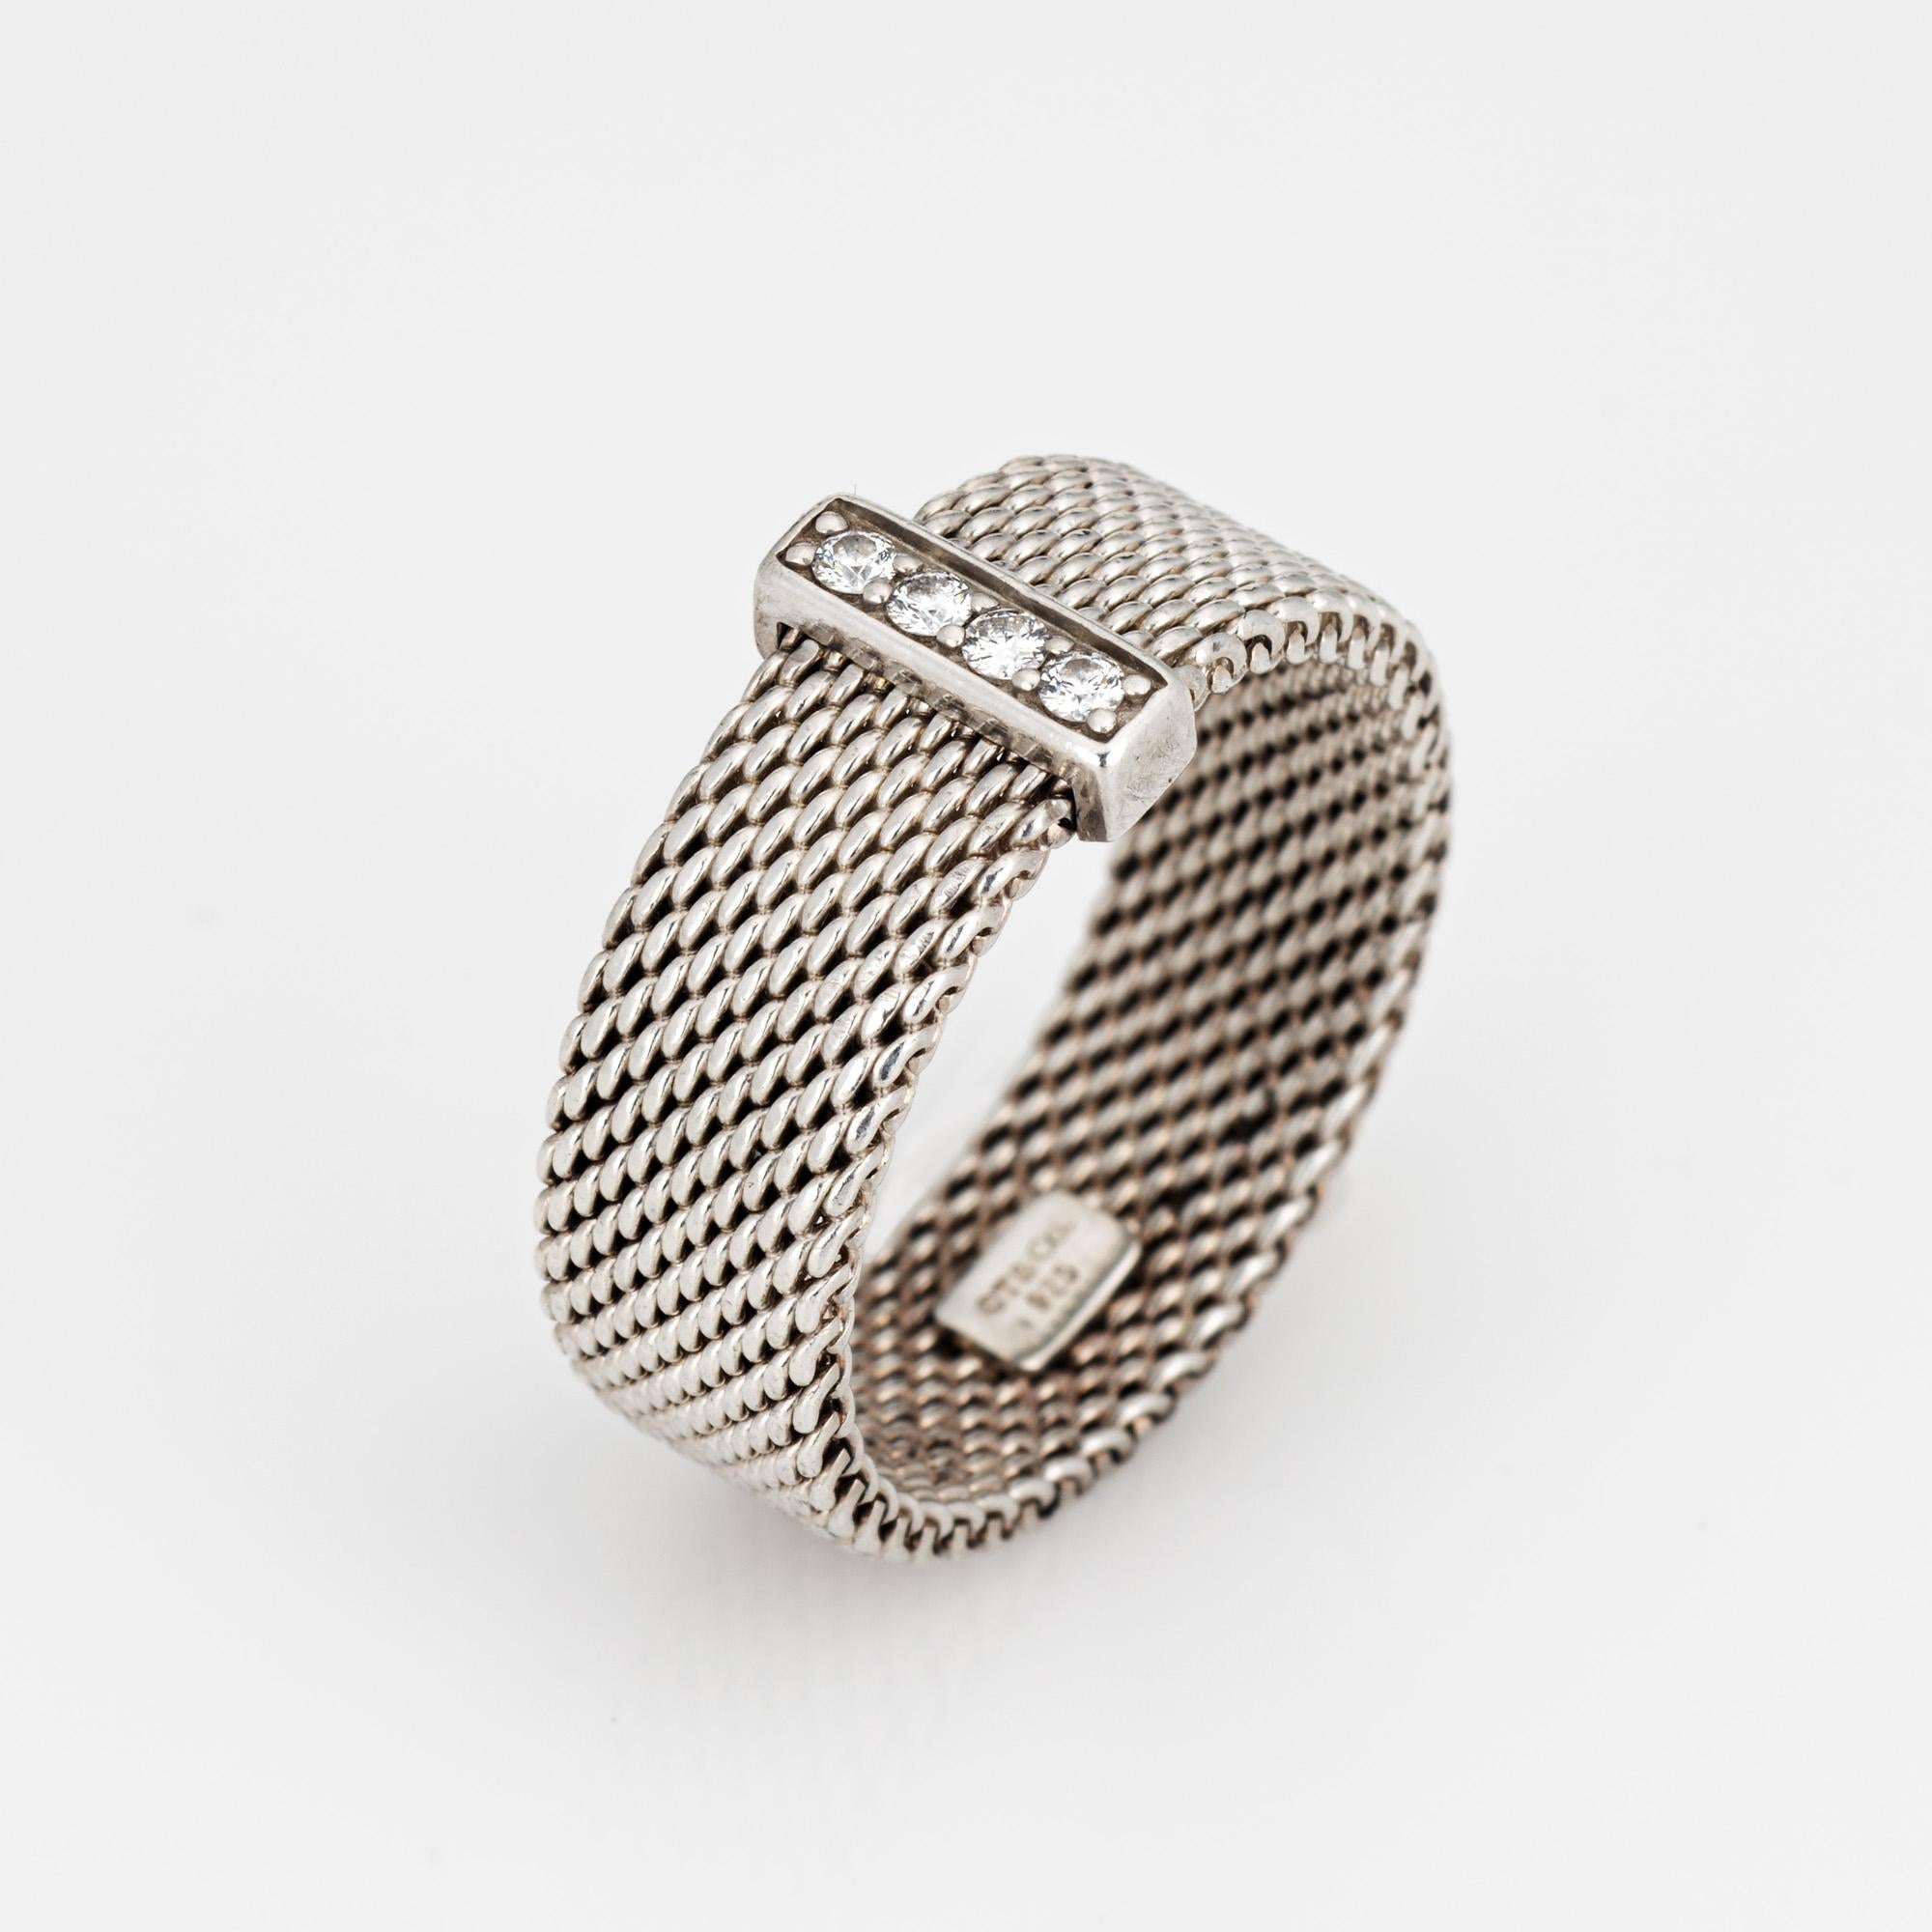 Pre-owned Tiffany & Co Somerset ring crafted in sterling silver.  

Diamonds total an estimated 0.05 carats (estimated at H-I color and VS2 clarity).
The classic mesh band is set with a strand of diamonds to the center. The 7mm wide band (0.27